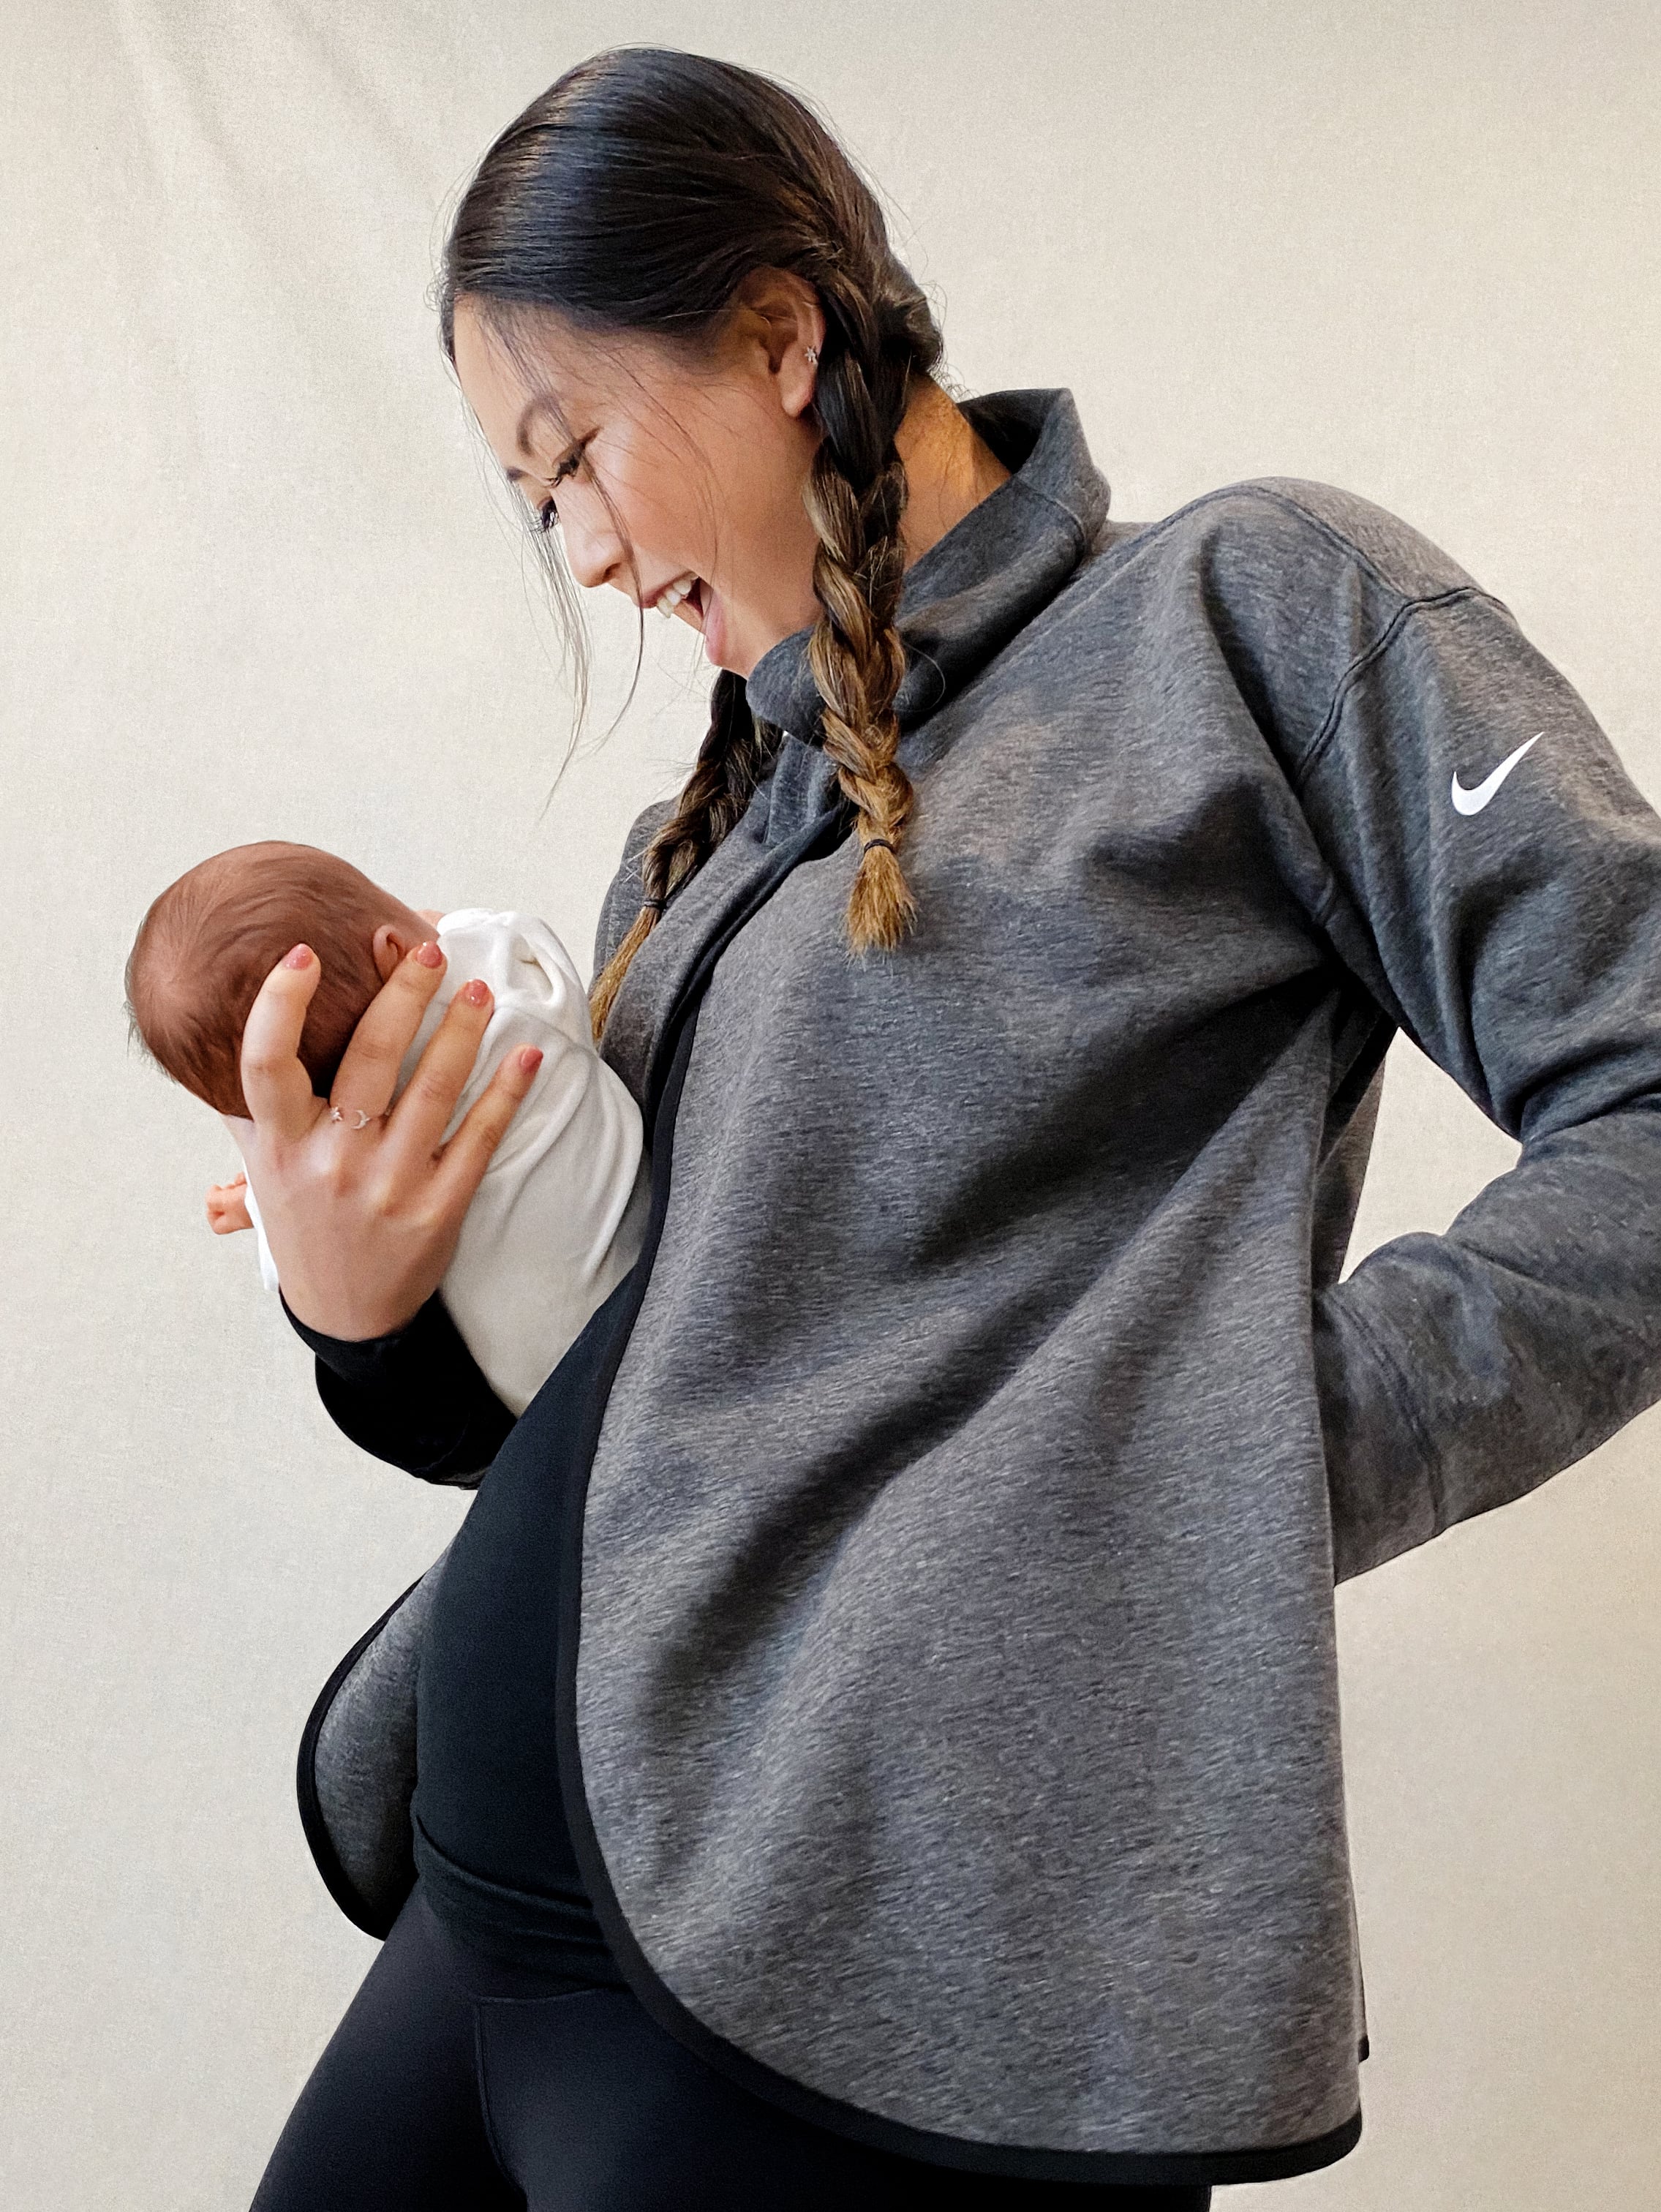 Nike Maternity Leggings and Bikers - clothing & accessories - by